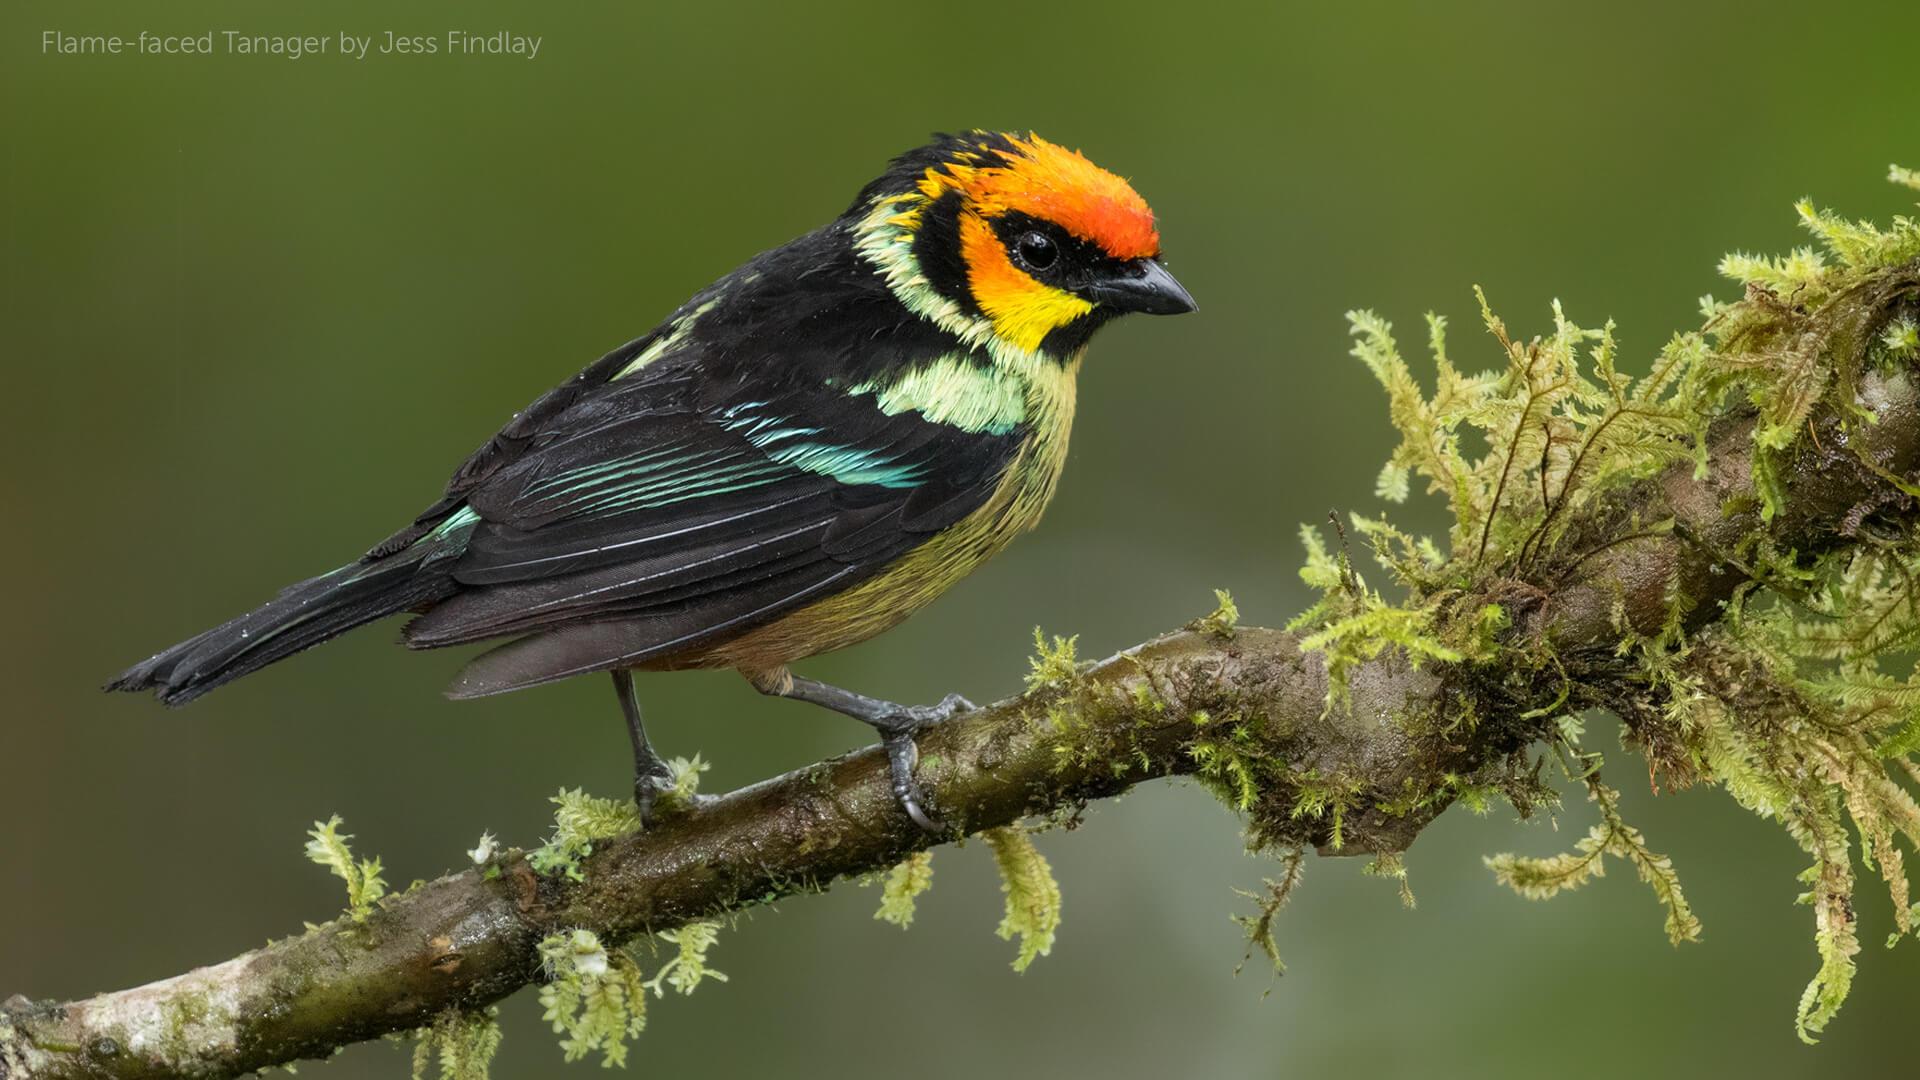 Flame Faced Tanager. American Bird Conservancy